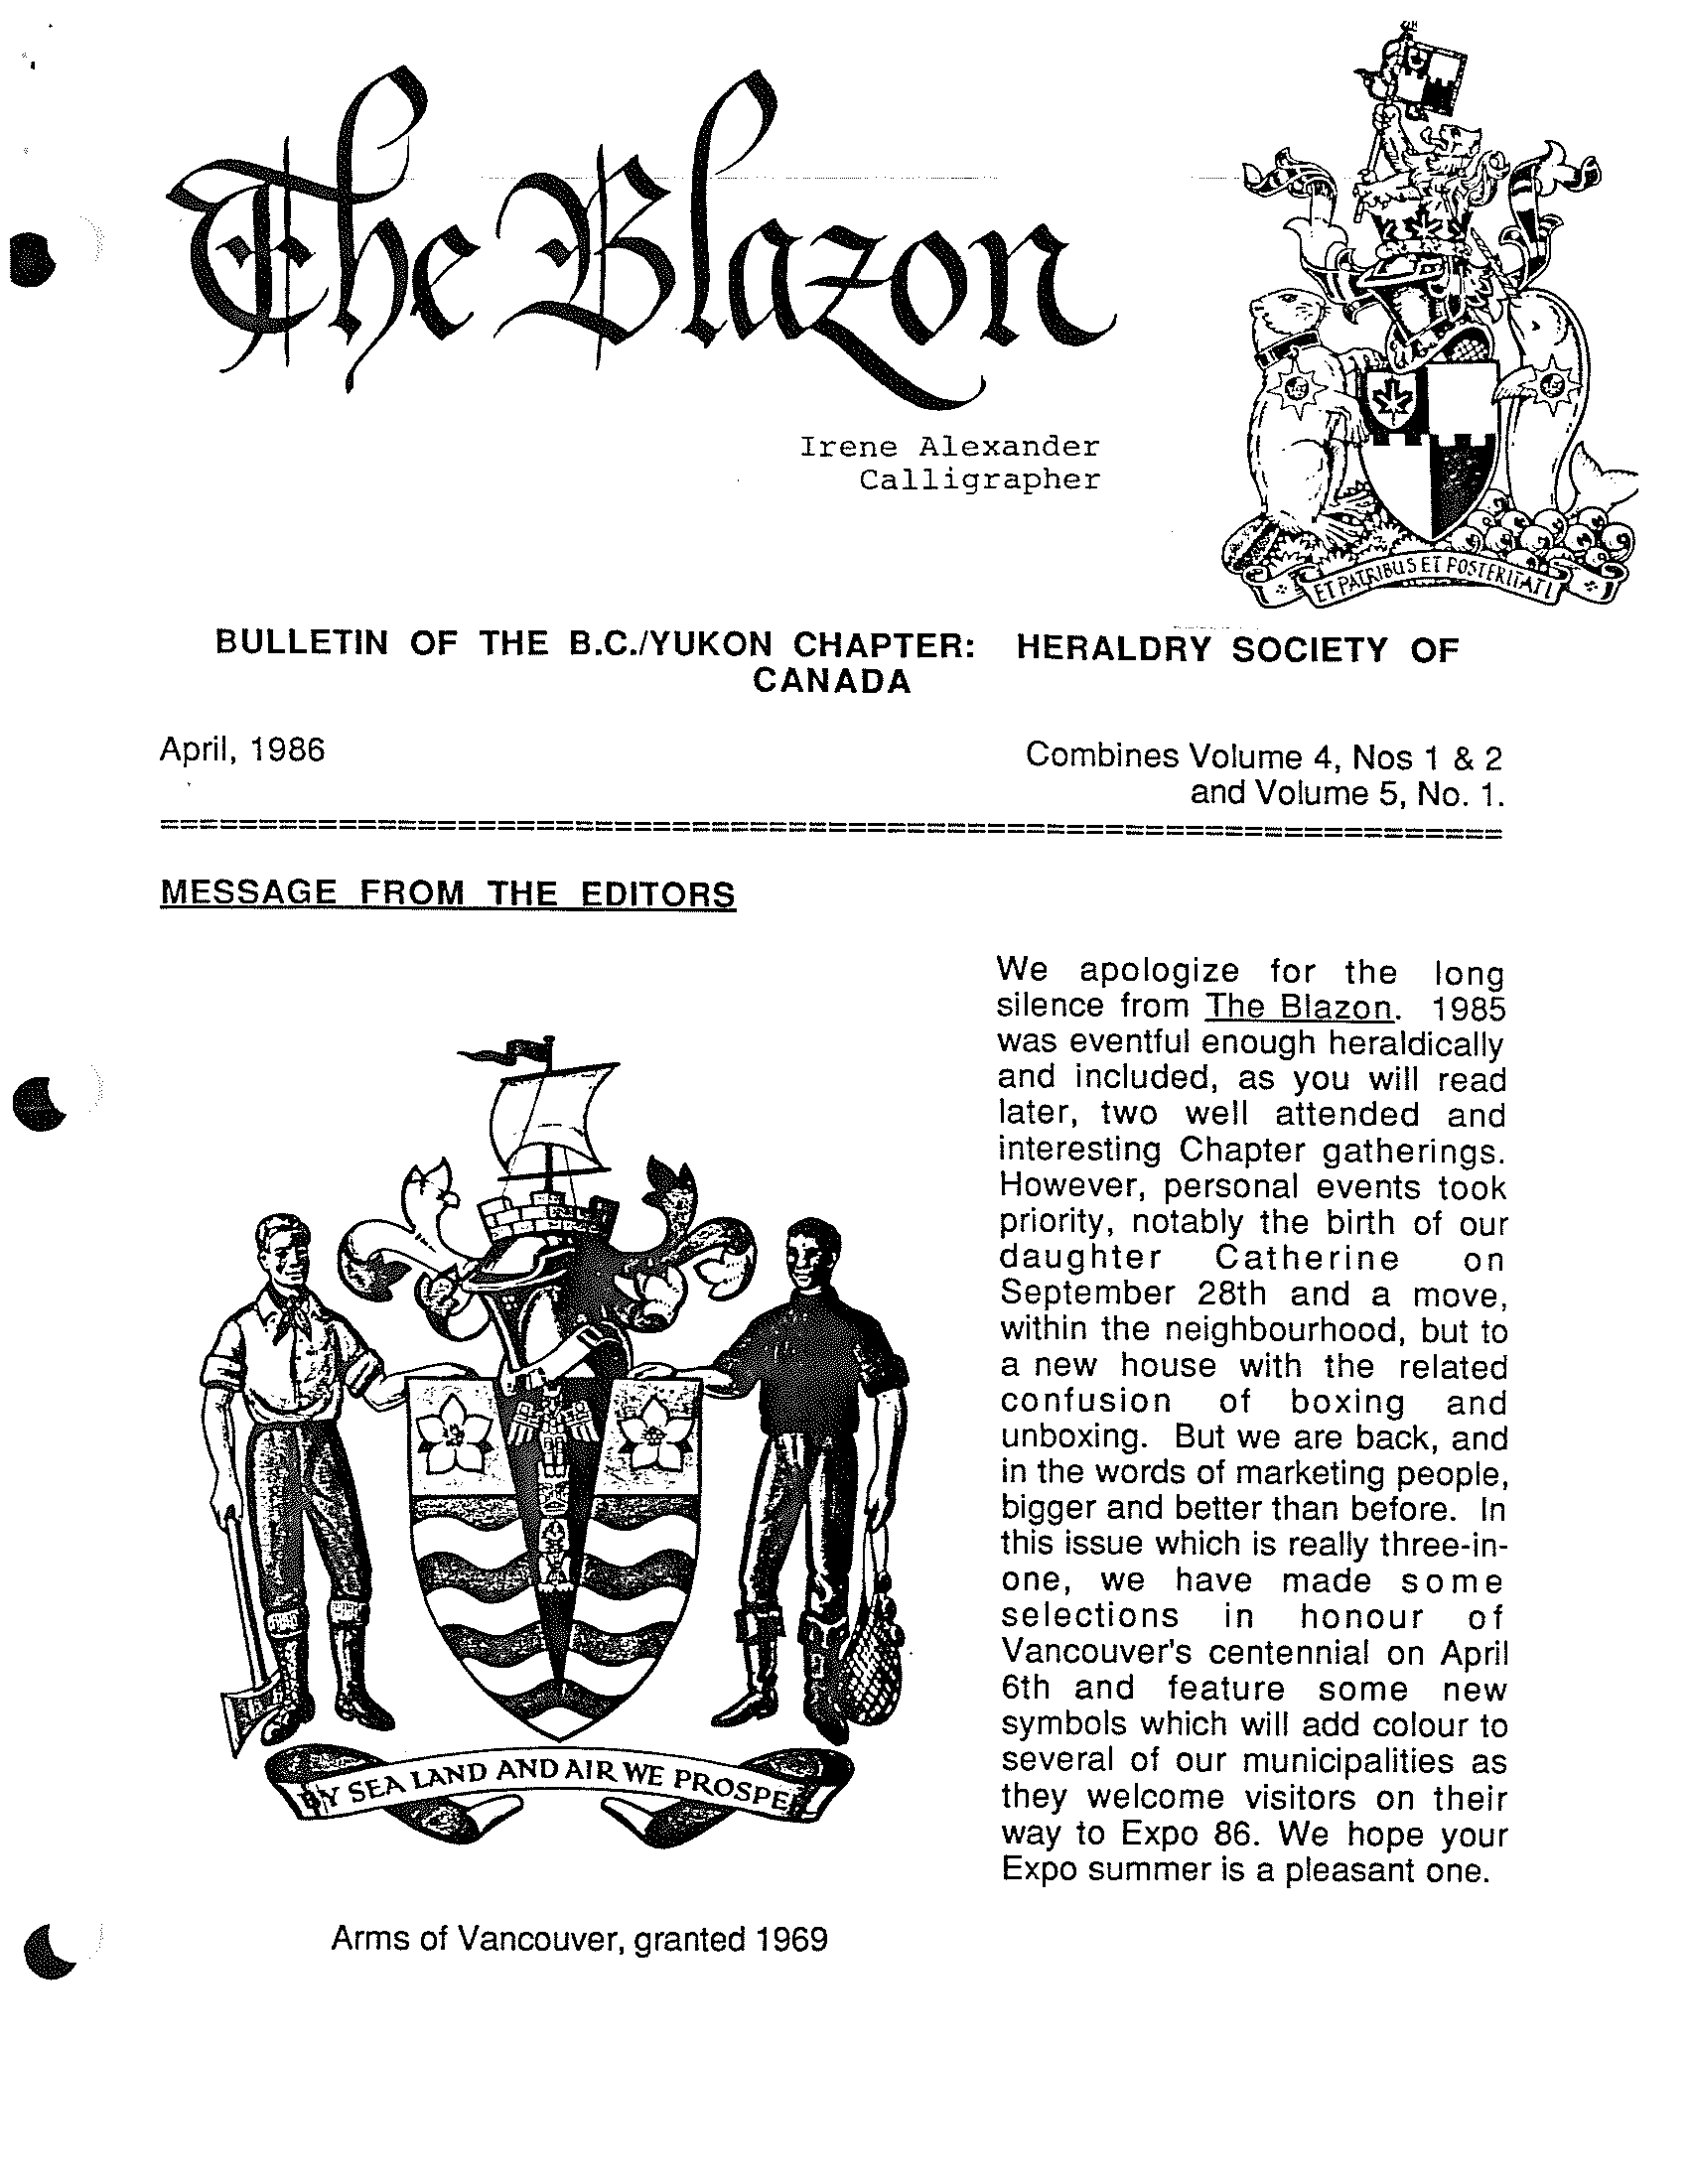 Reduced photo of the front page